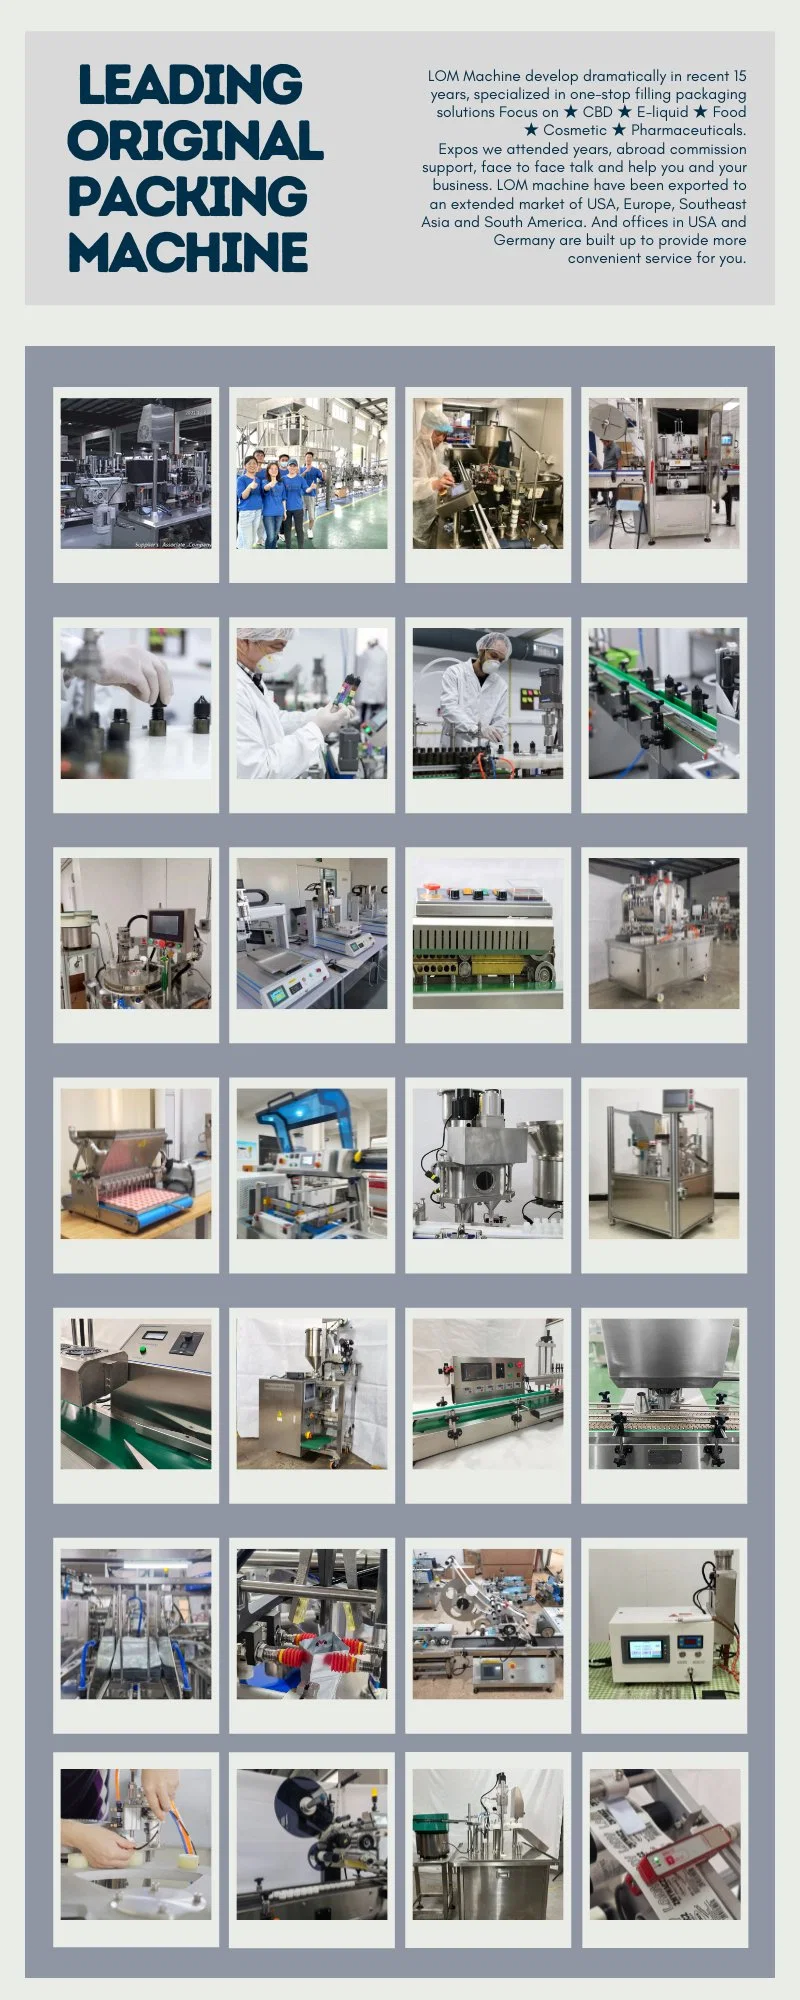 High Speed Candy Soup Bag Filling Sealing Packing Machine Packaging Machines